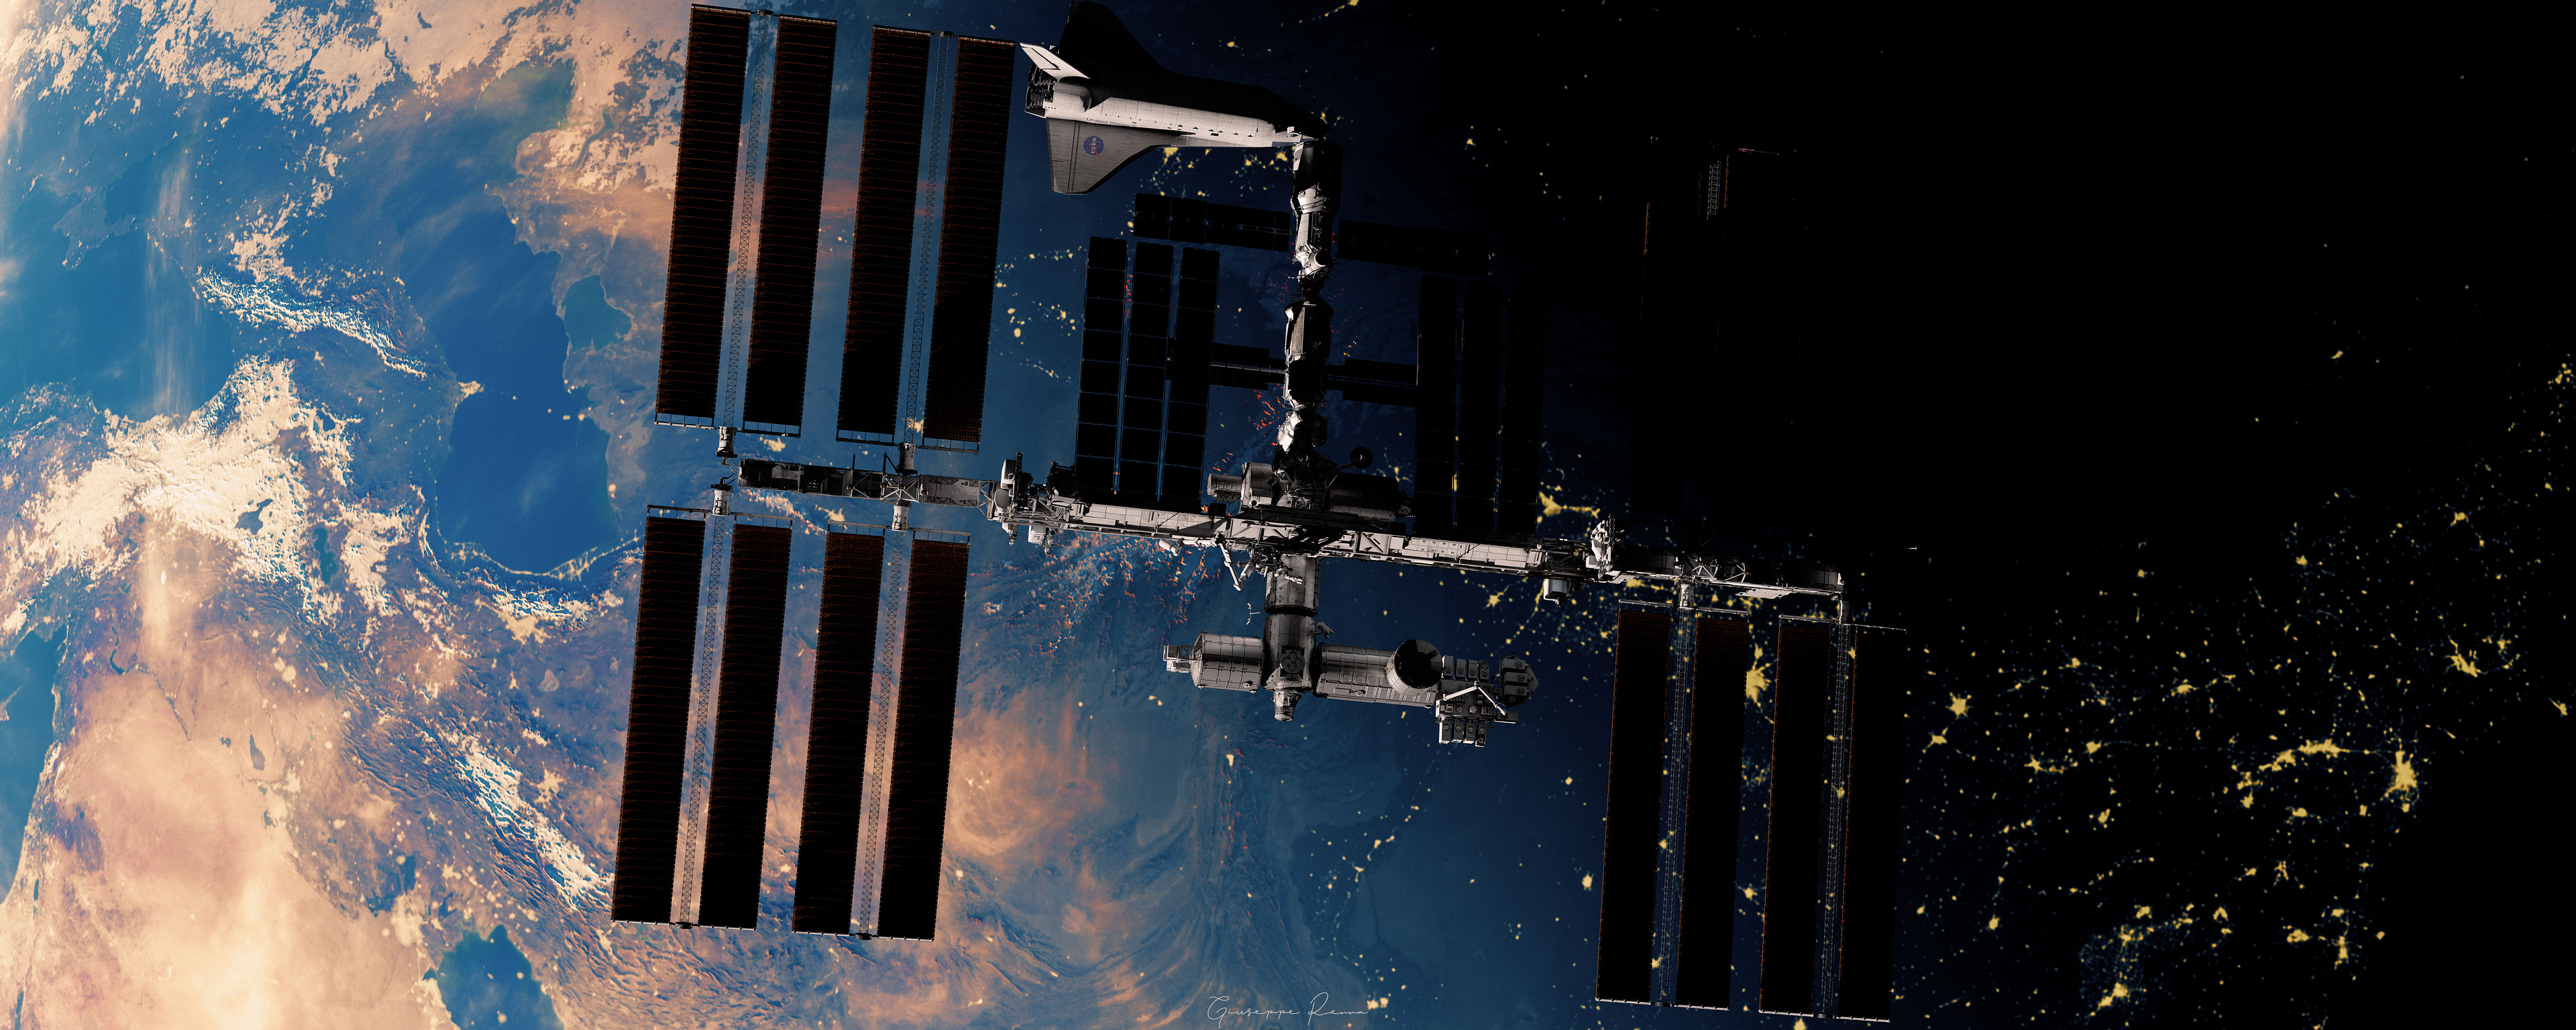 Man Made International Space Station HD Wallpaper | Background Image